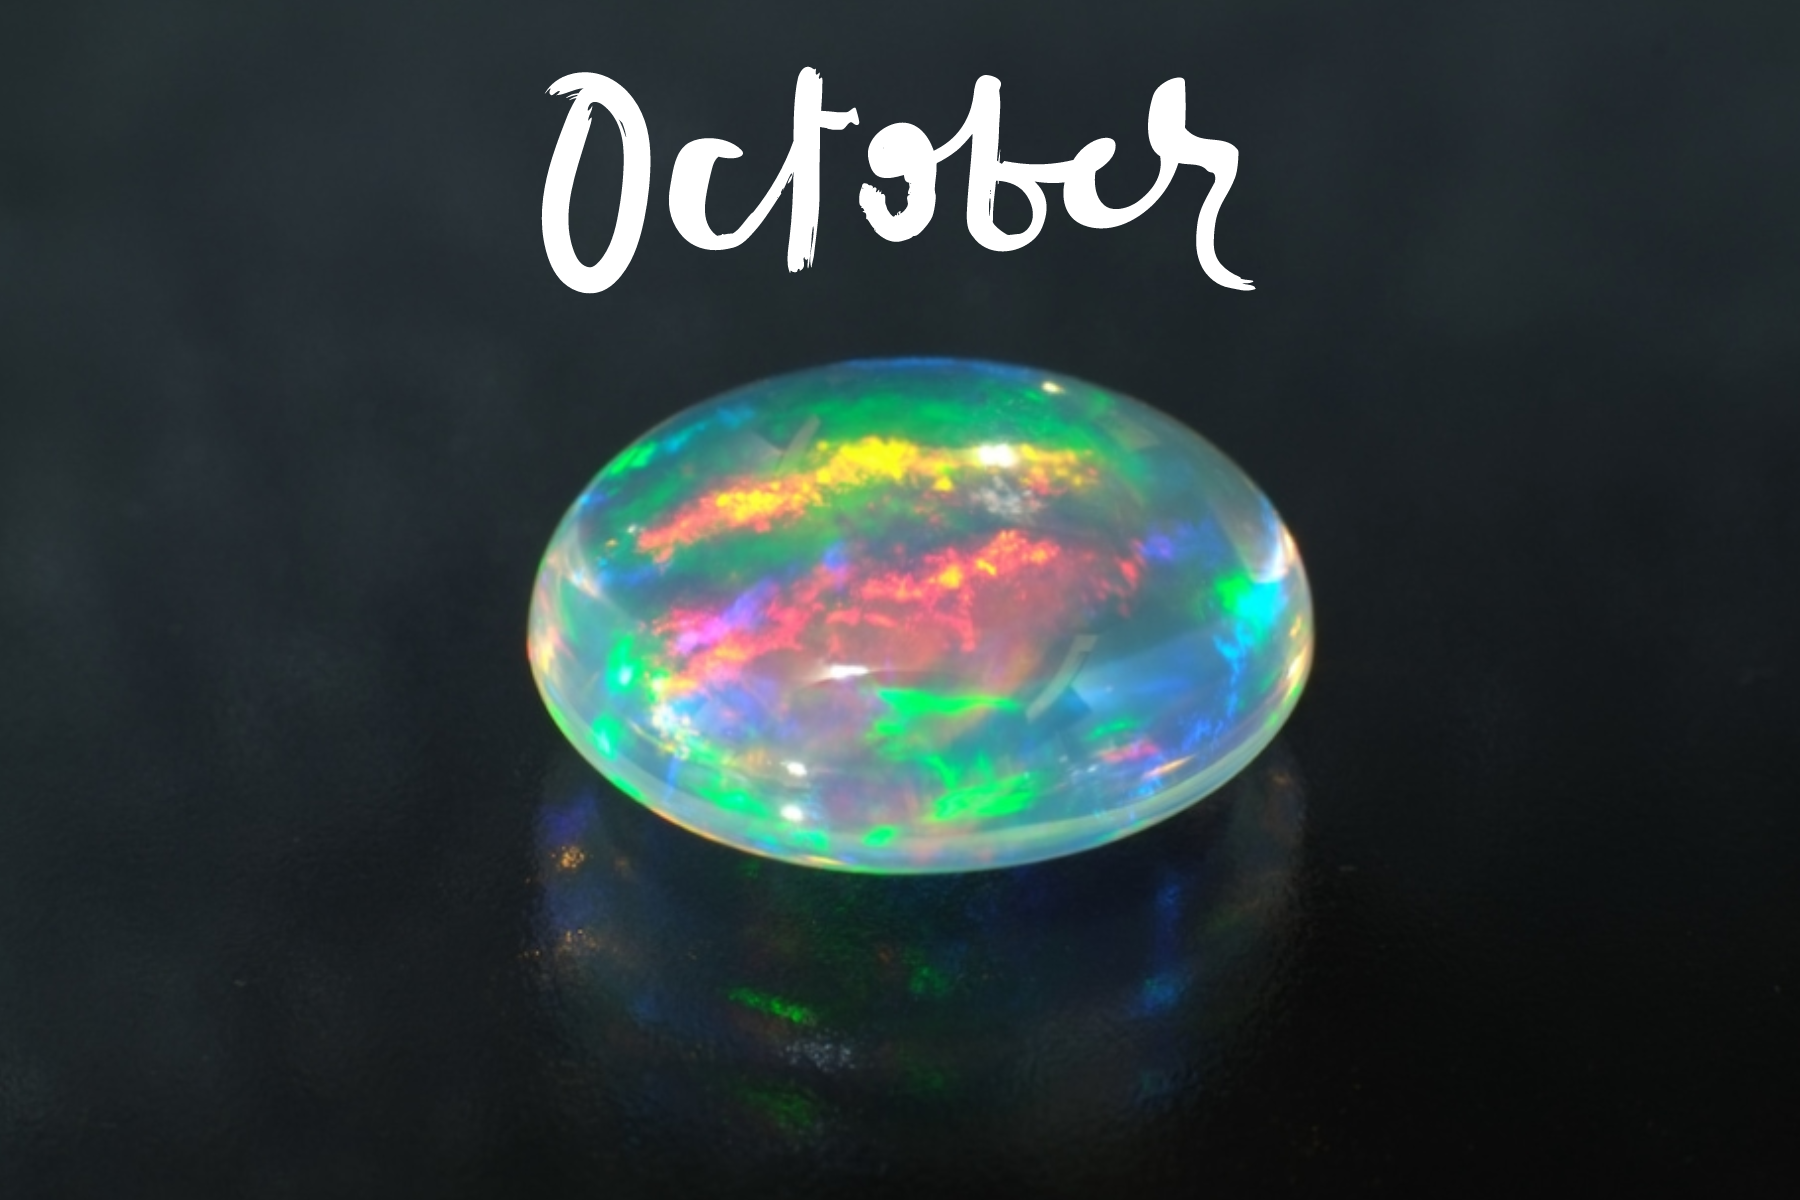 A word "October" and an oblong opal stone